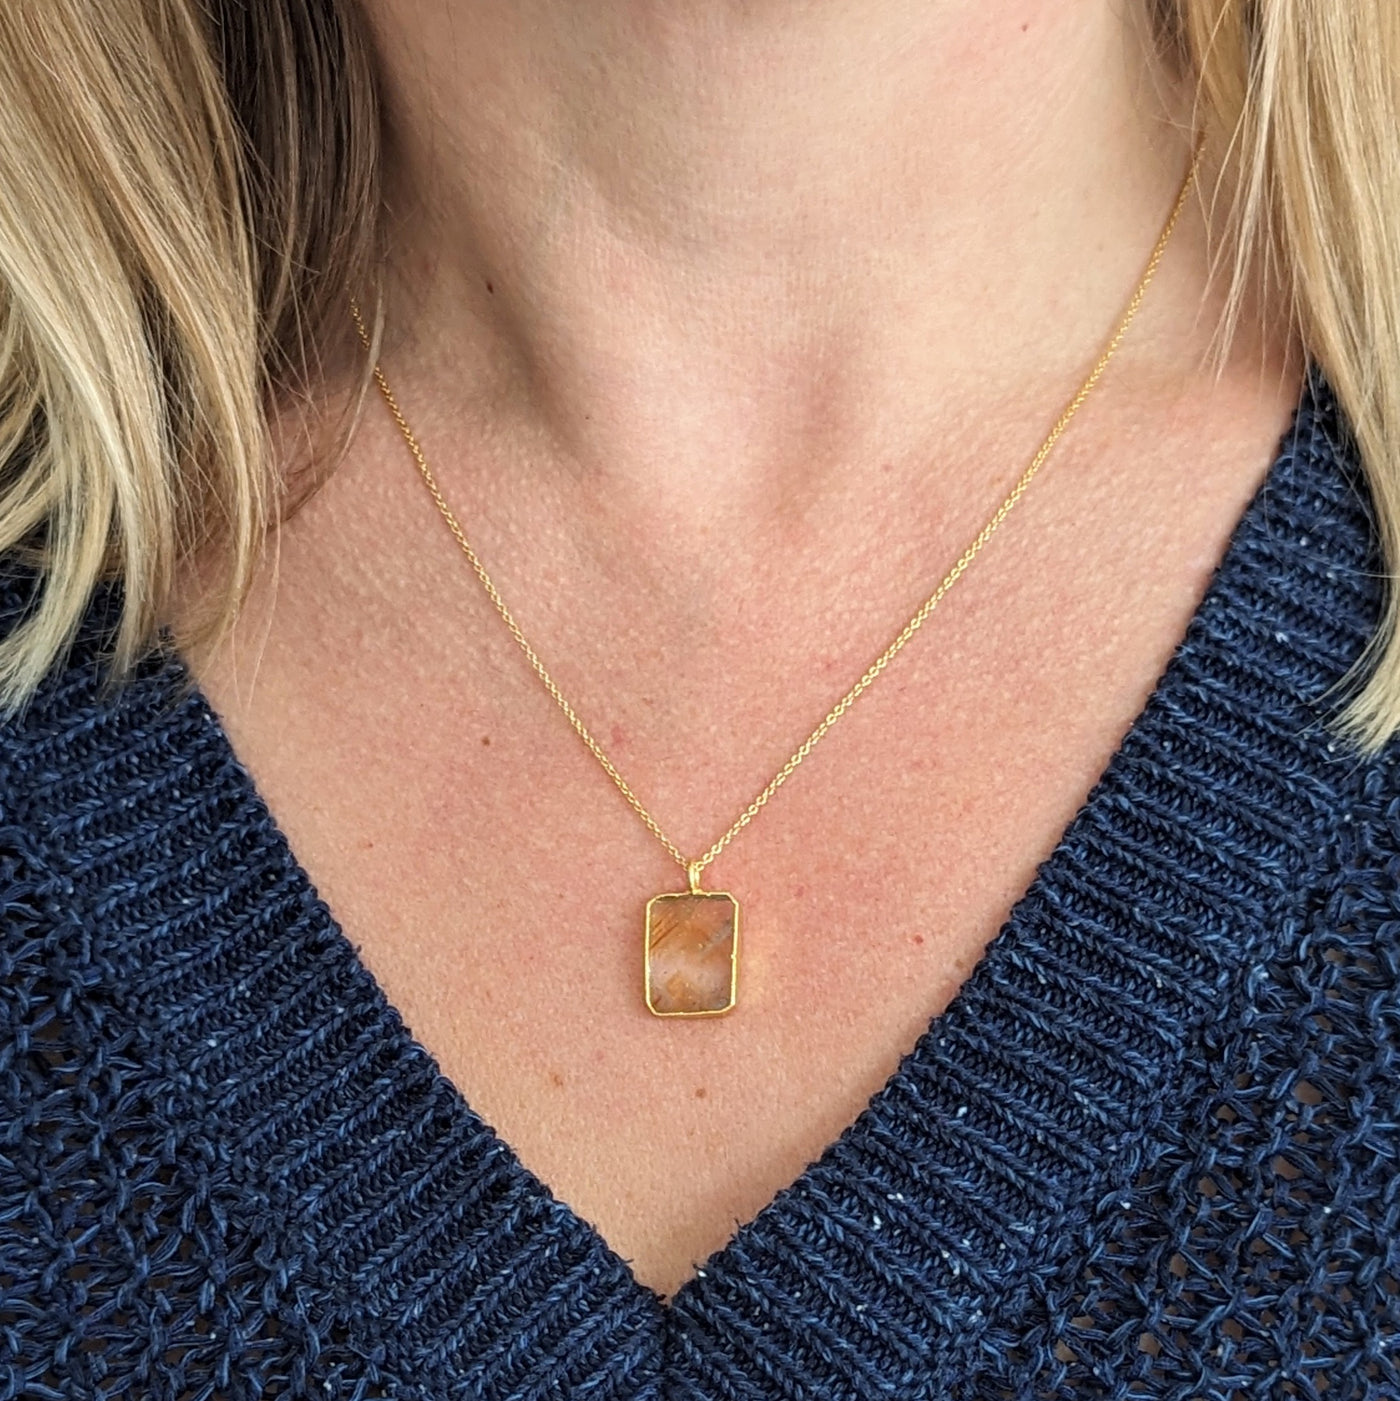 The Rectangle Citrine Gemstone Necklace - 18ct Gold Plated